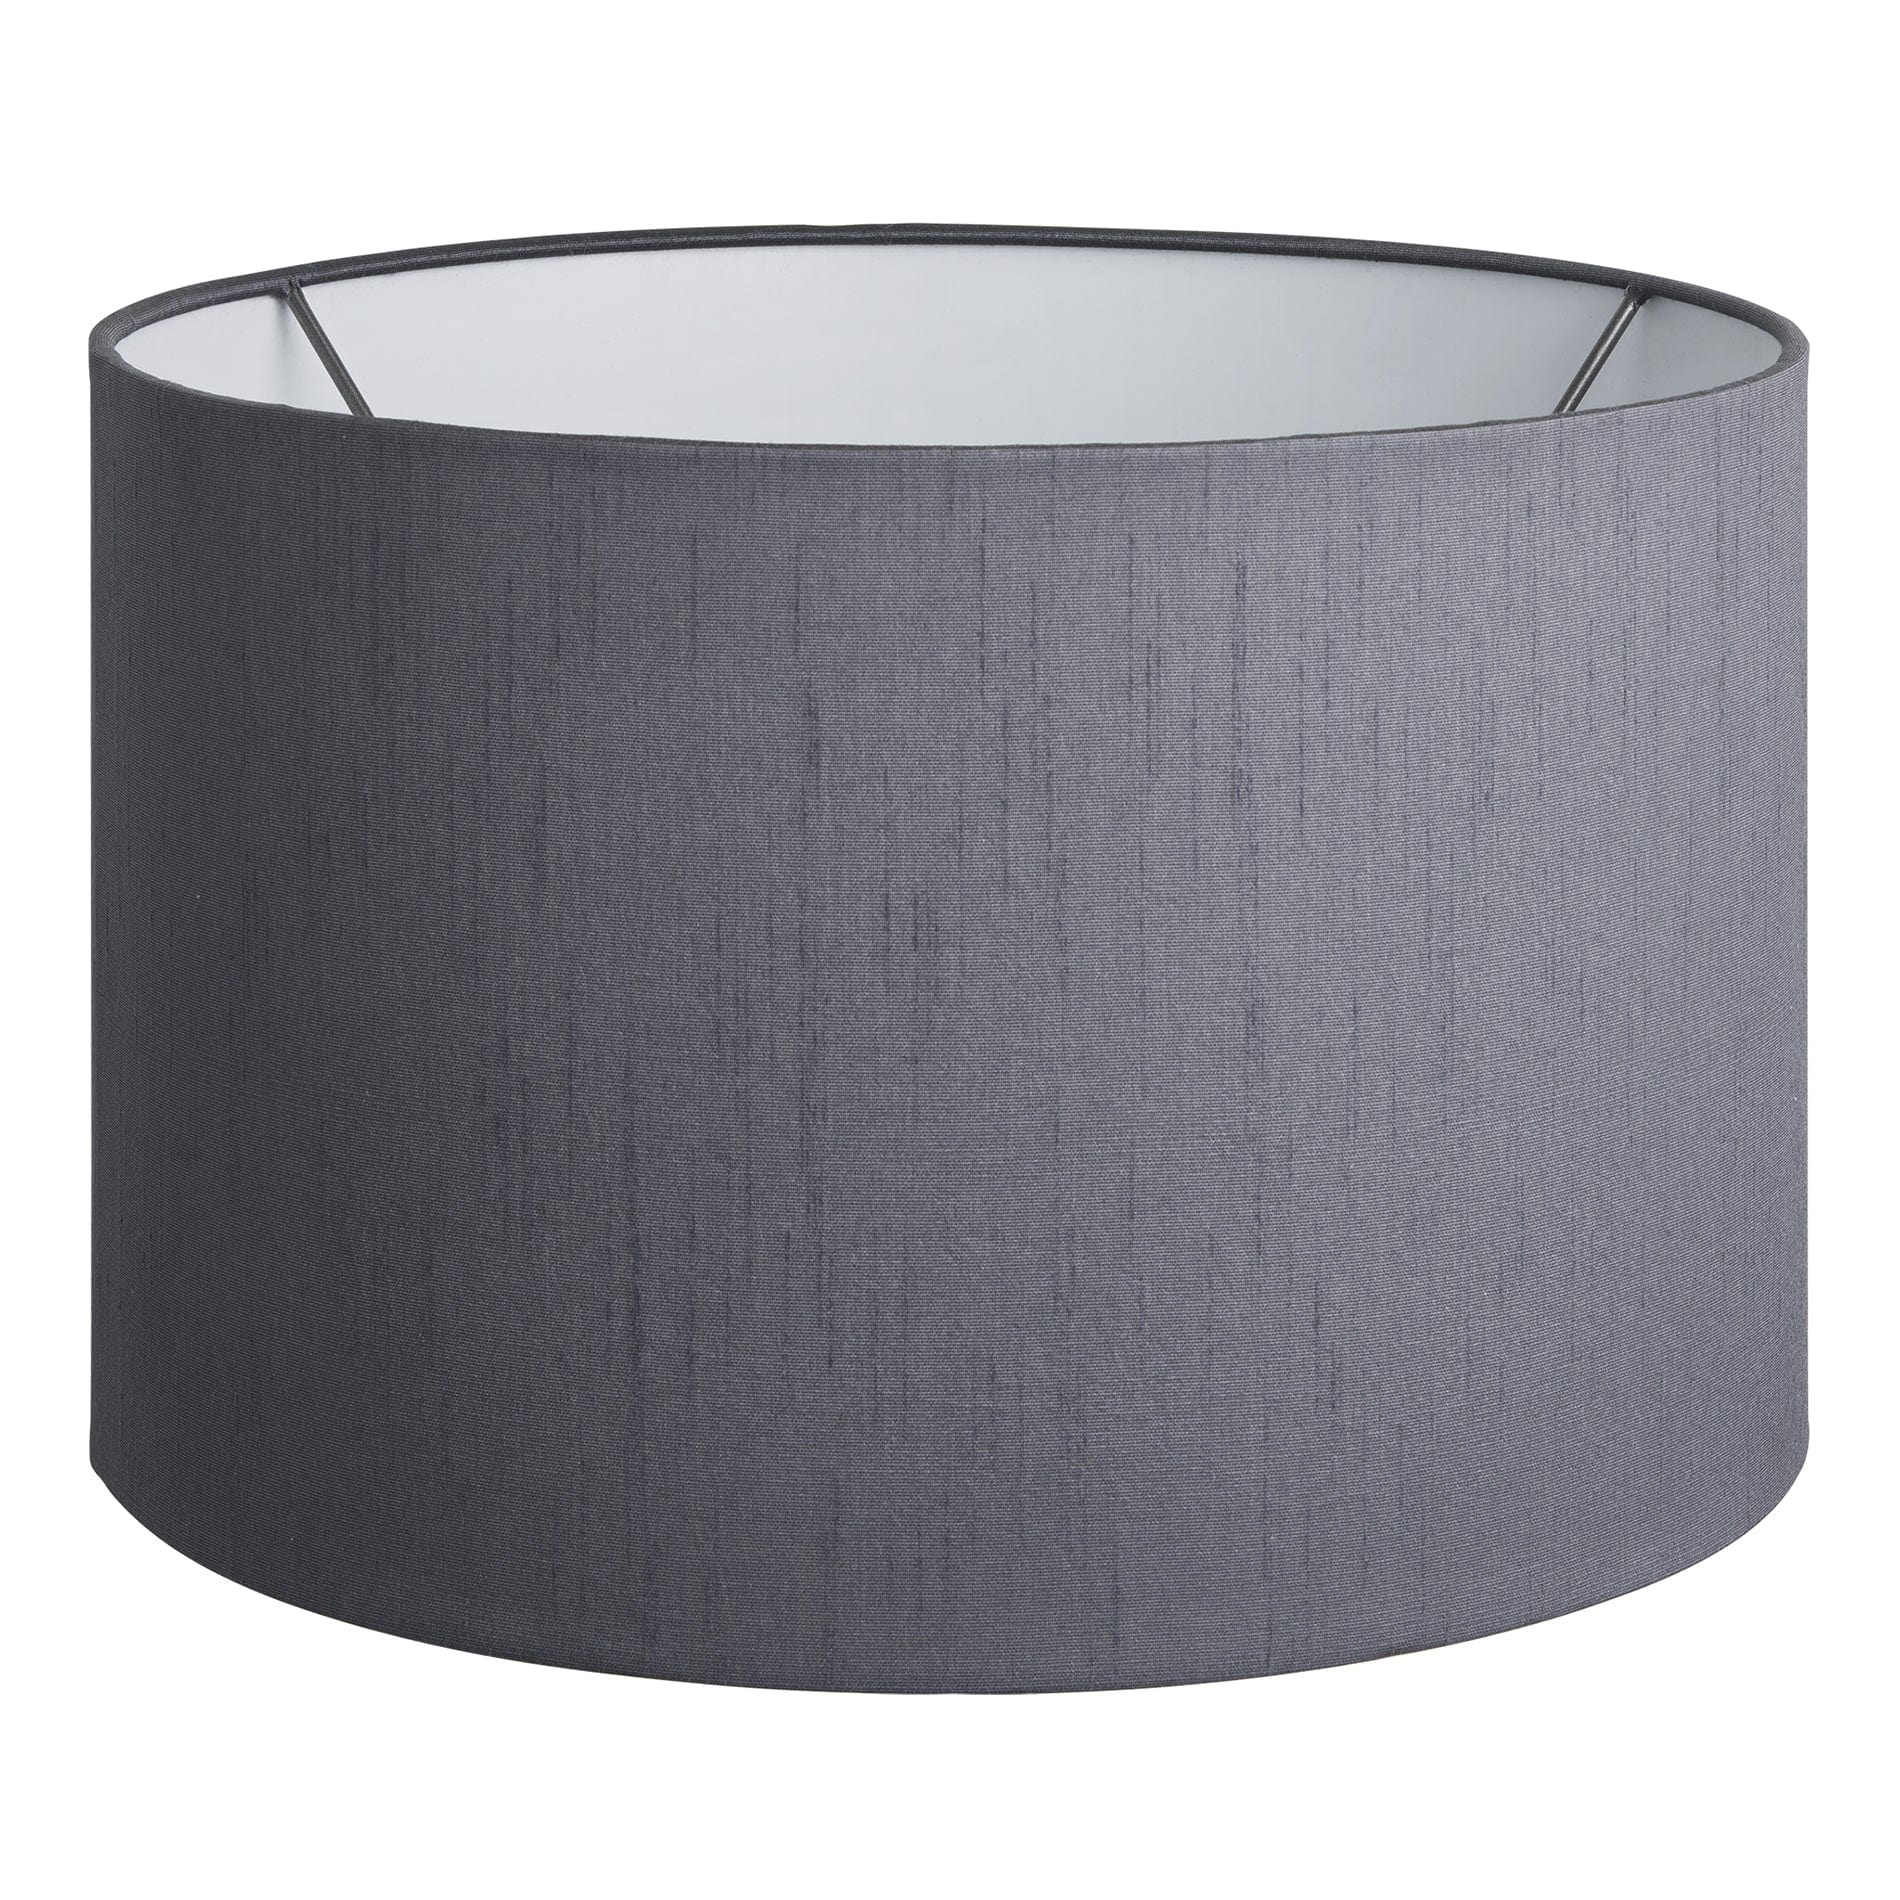 Drum  - Large - Grey Dupion Silk - Lampshade Only Industville DR-L-GRDS-LSO